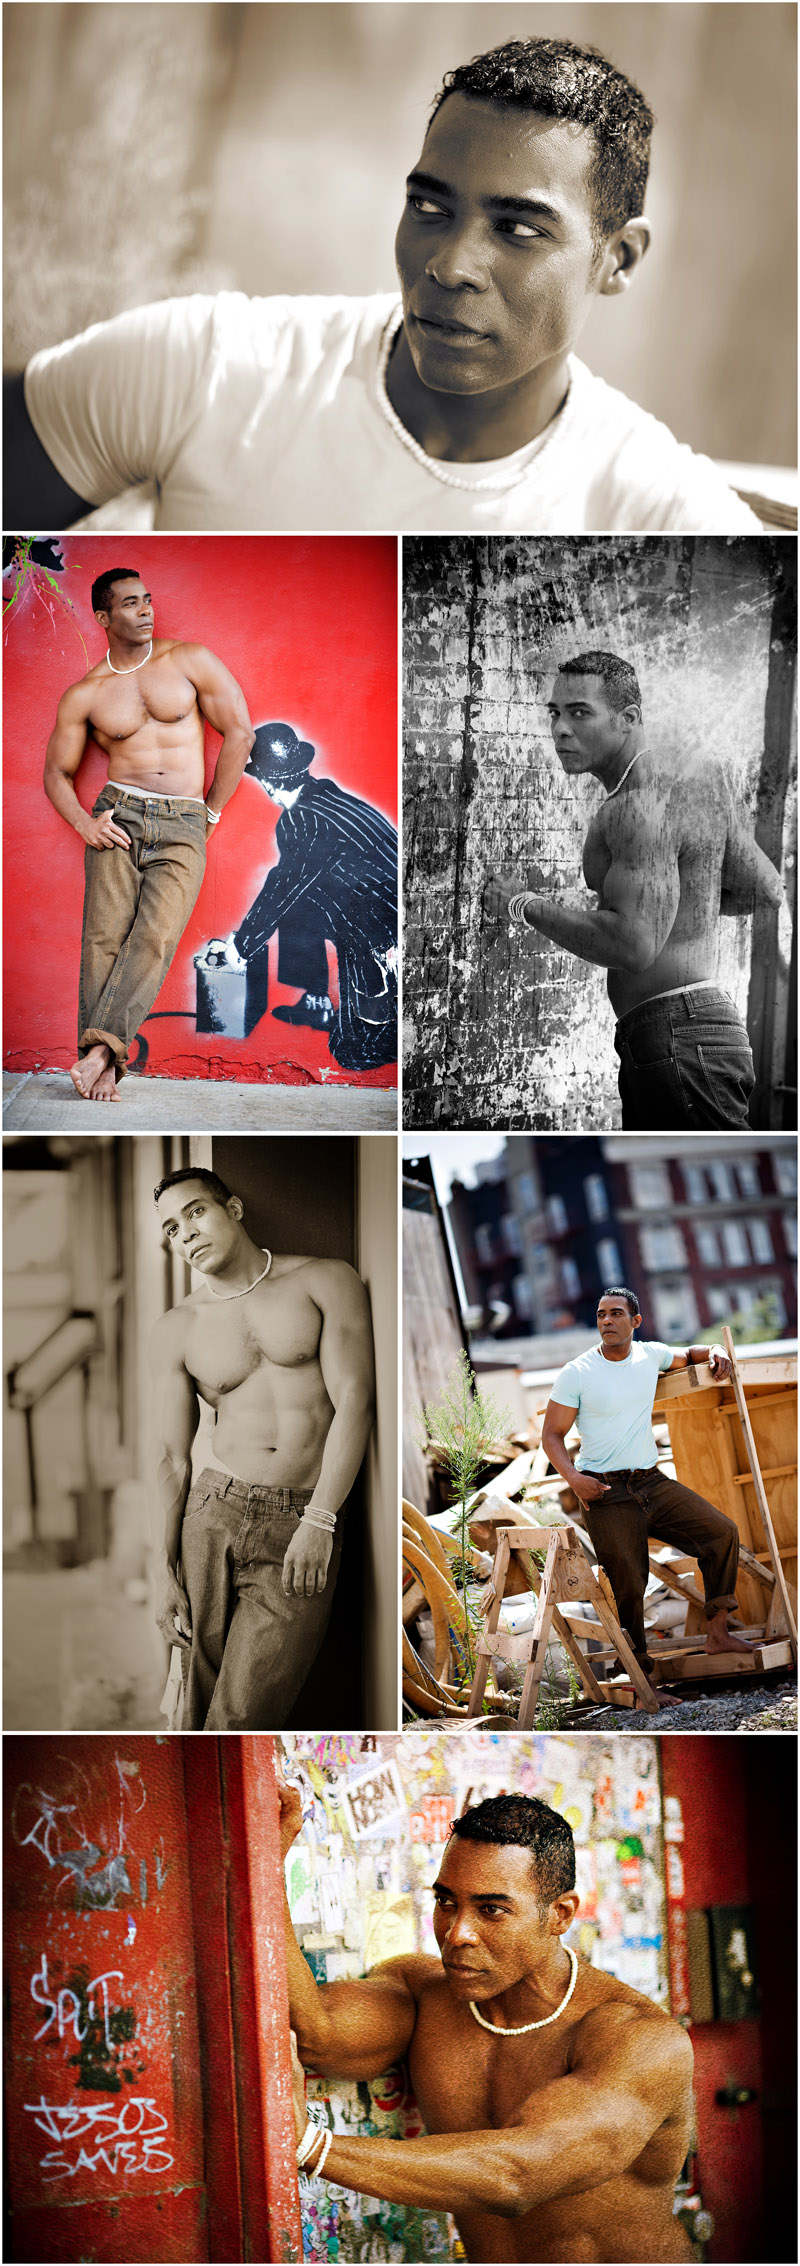 Male model photo shoot of Reggie Resino in Meatpacking District - NY, NY